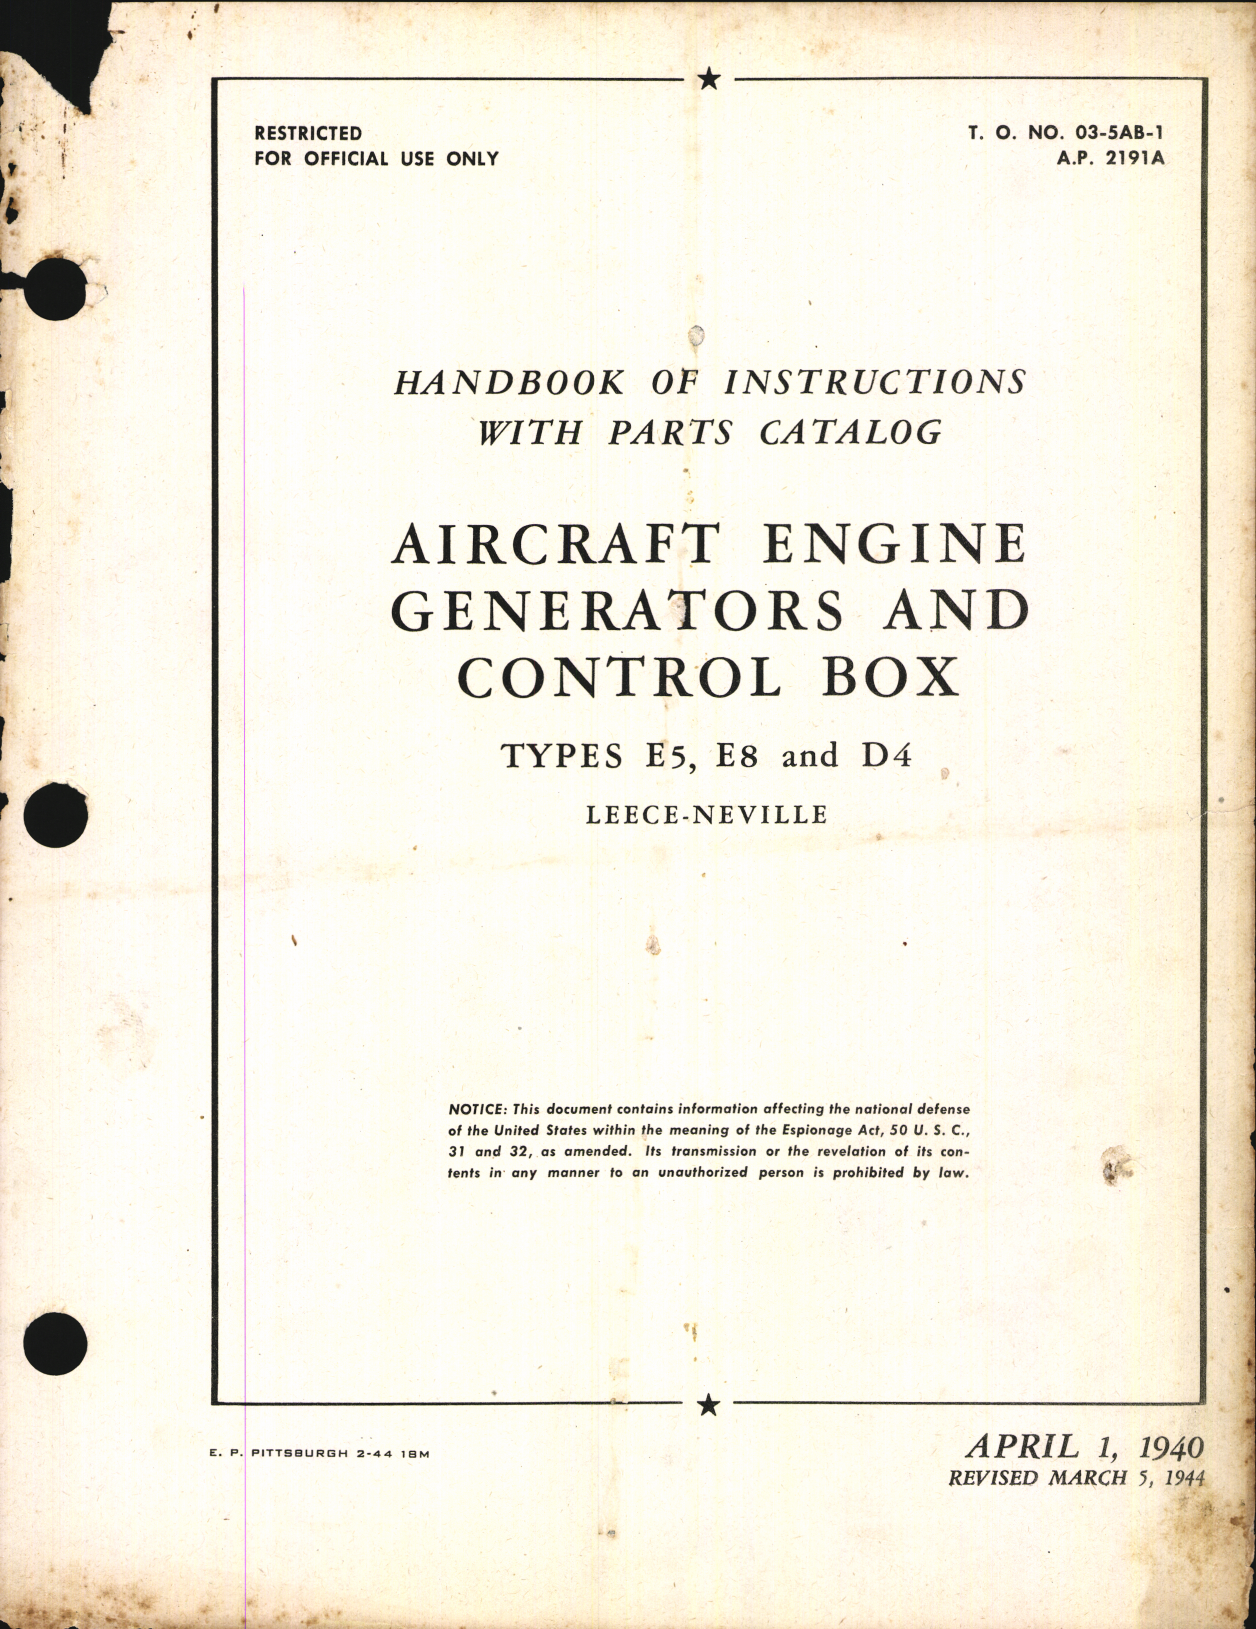 Sample page 1 from AirCorps Library document: Handbook of Instructions with Parts Catalog for Aircraft Engine Generators and Control Box Types E5, E8, and D4